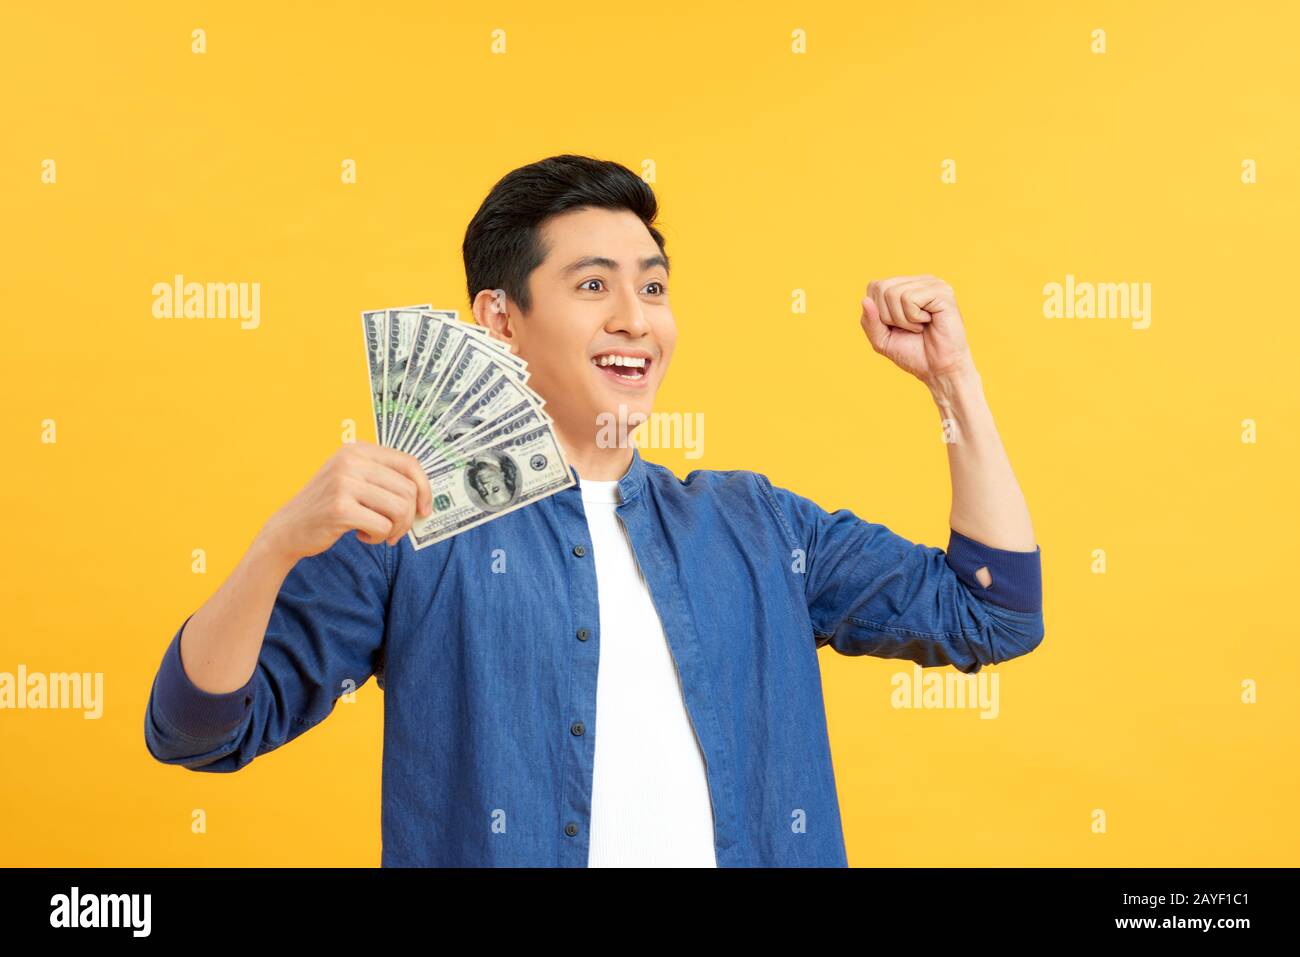 Closeup portrait, happy, excited successful senior lucky elderly man holding money dollar bills in hand isolated yellow background. Positive emotion f Stock Photo